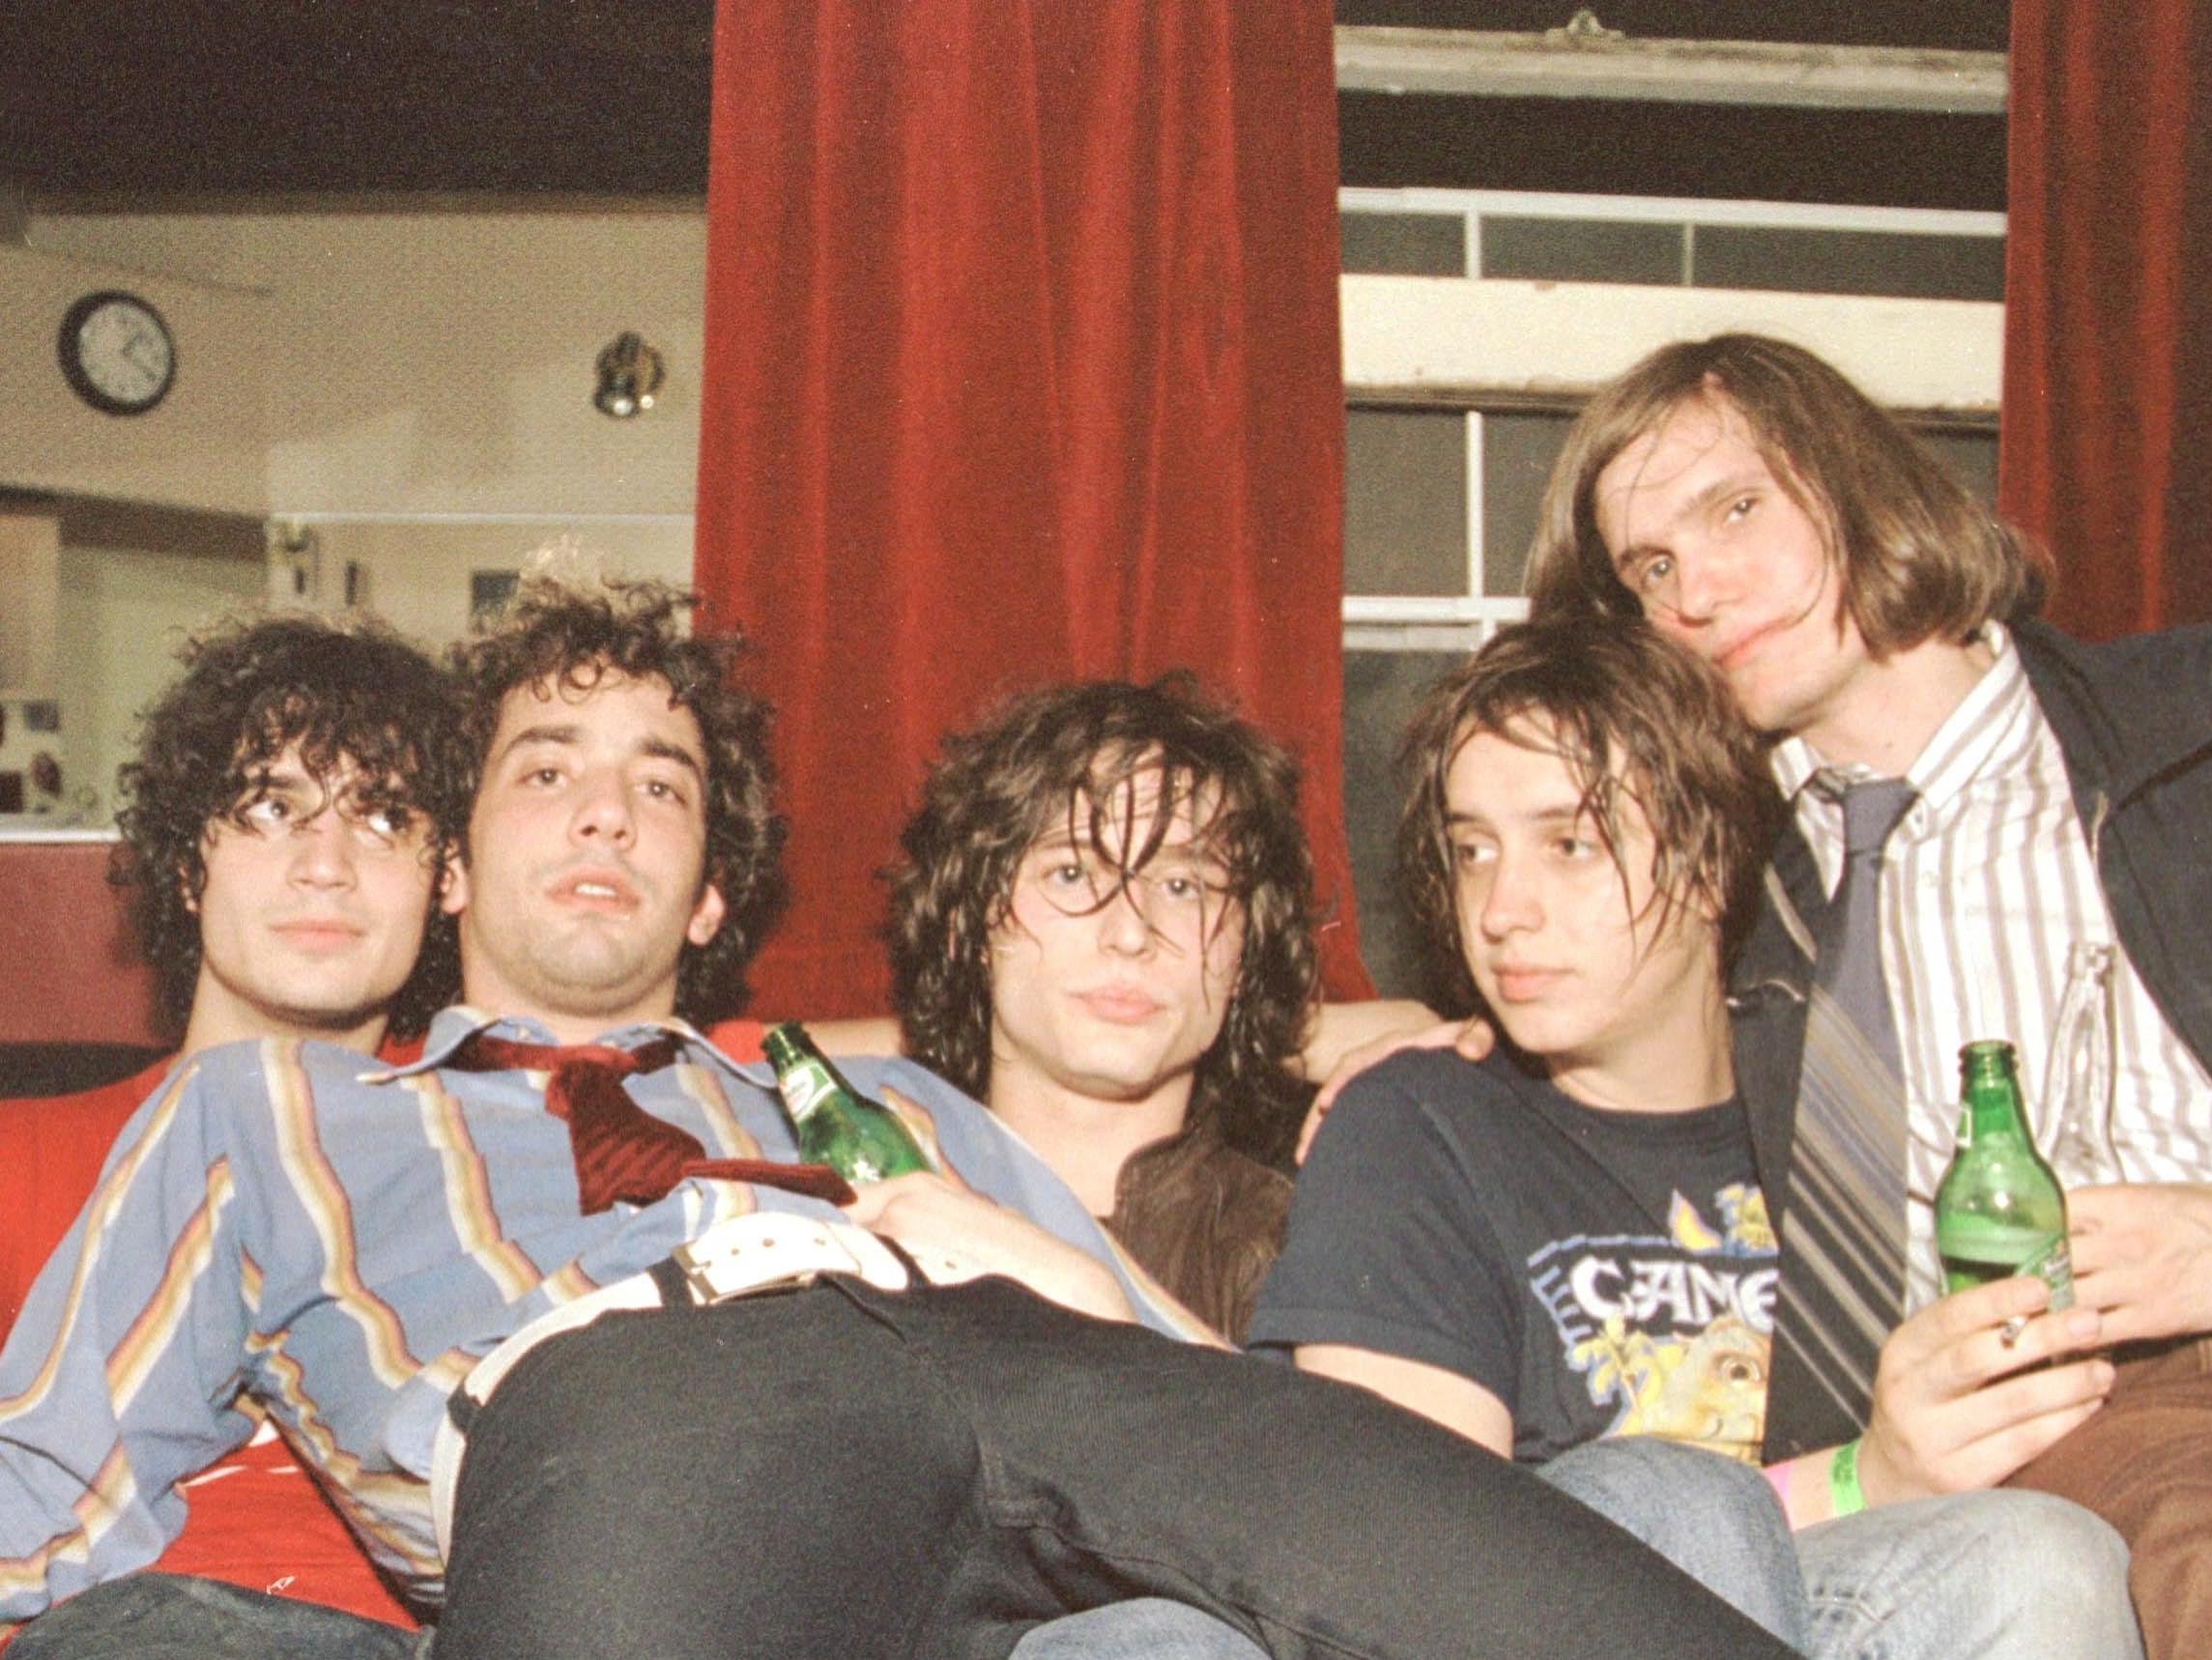 With ‘Is This It’, which was released 20 years ago, The Strokes frontman Julian Casablancas and his bandmates inspired a generation of millennial alt-rock